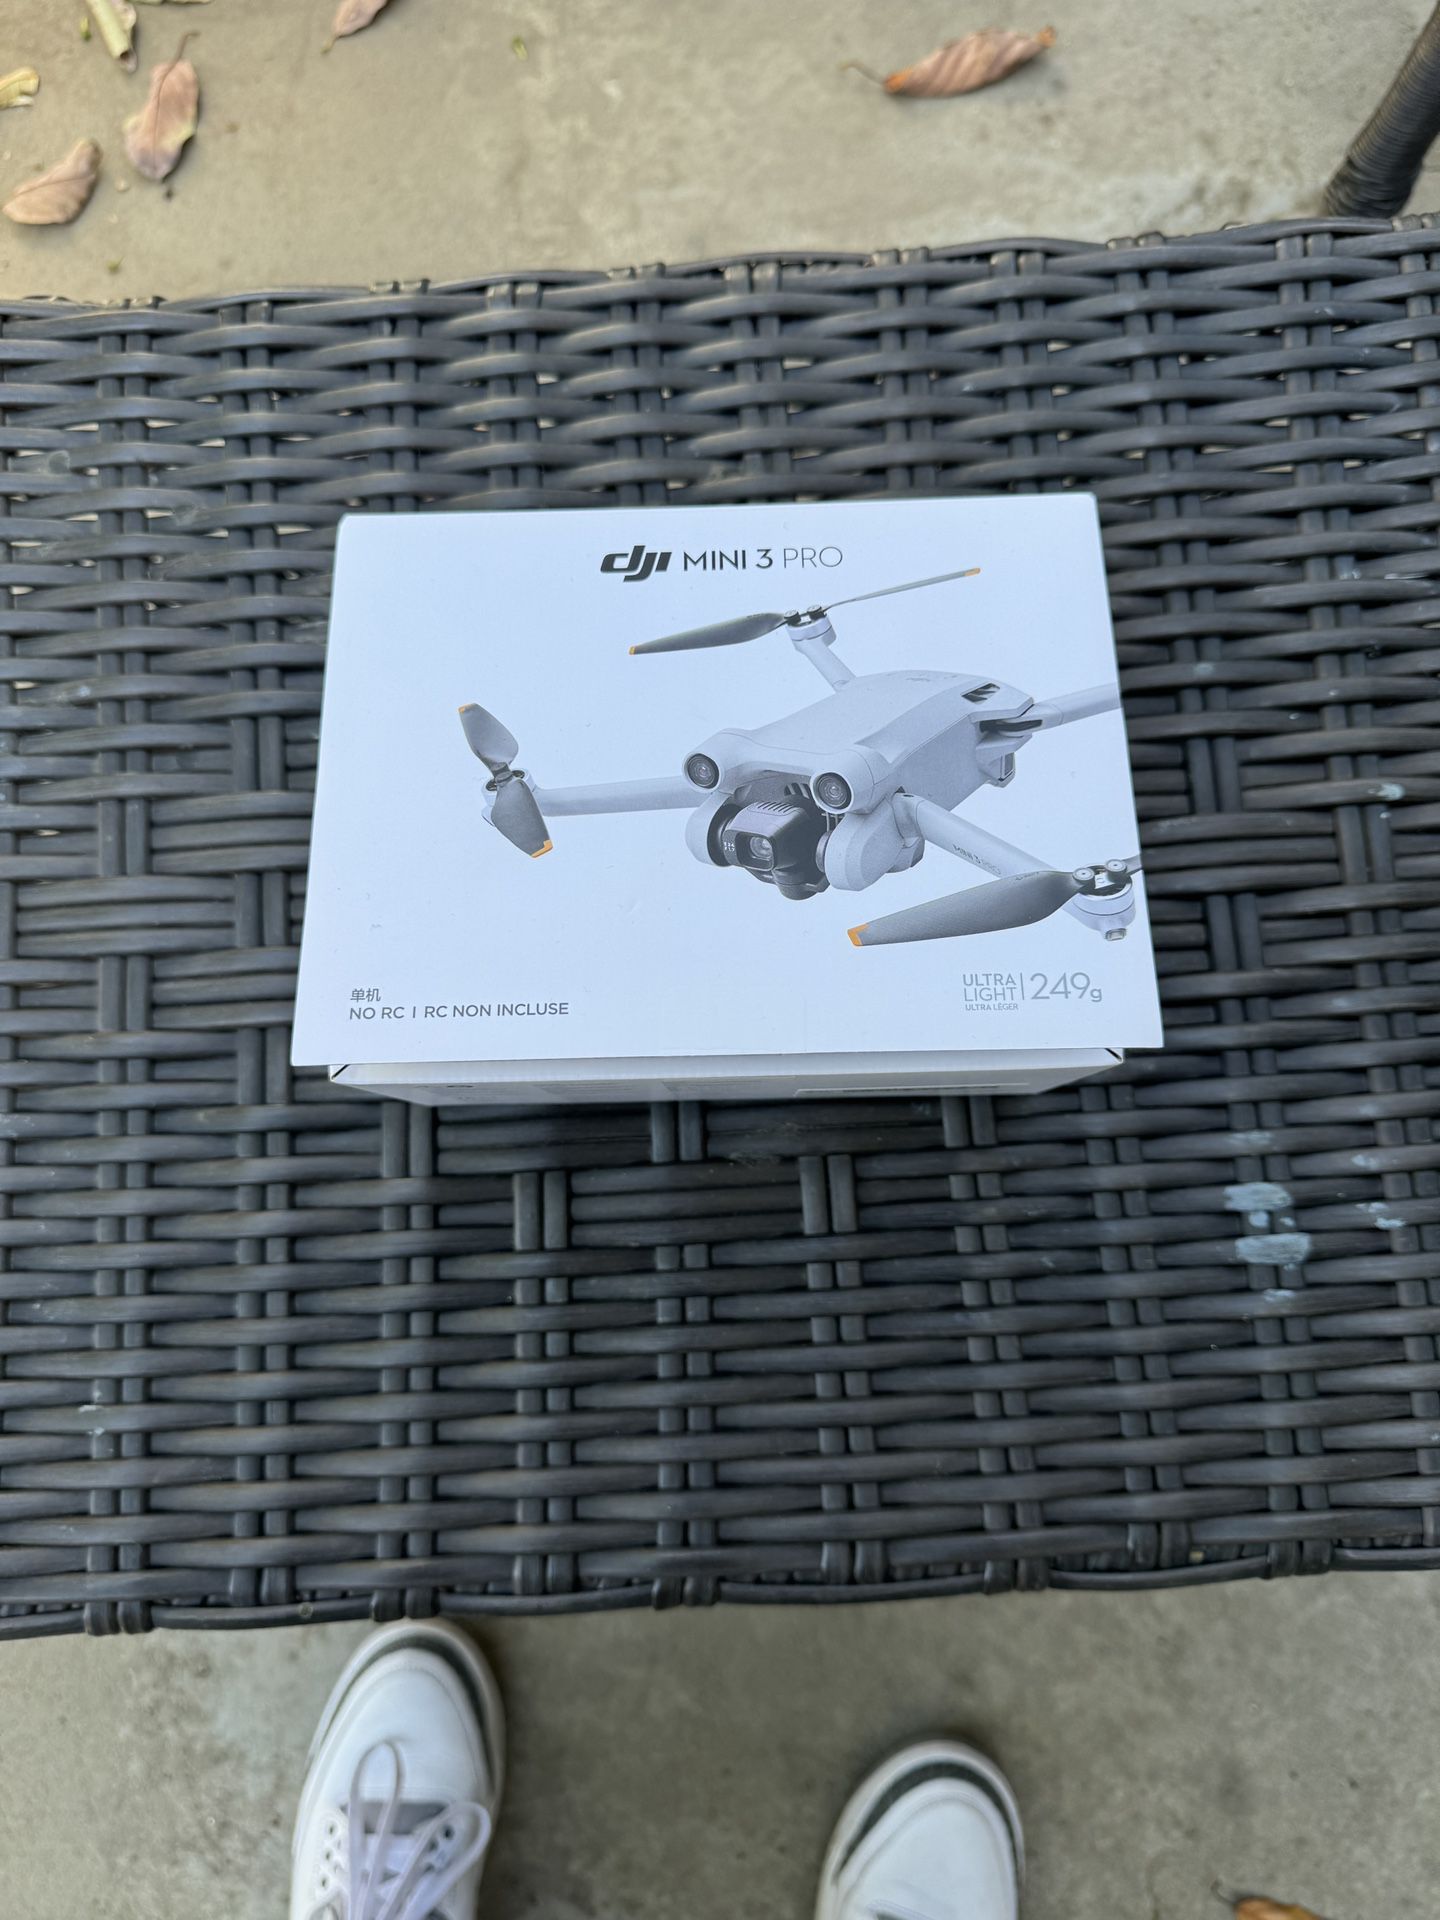 Dji mini 3 pro DRONE ONLY out of stock online